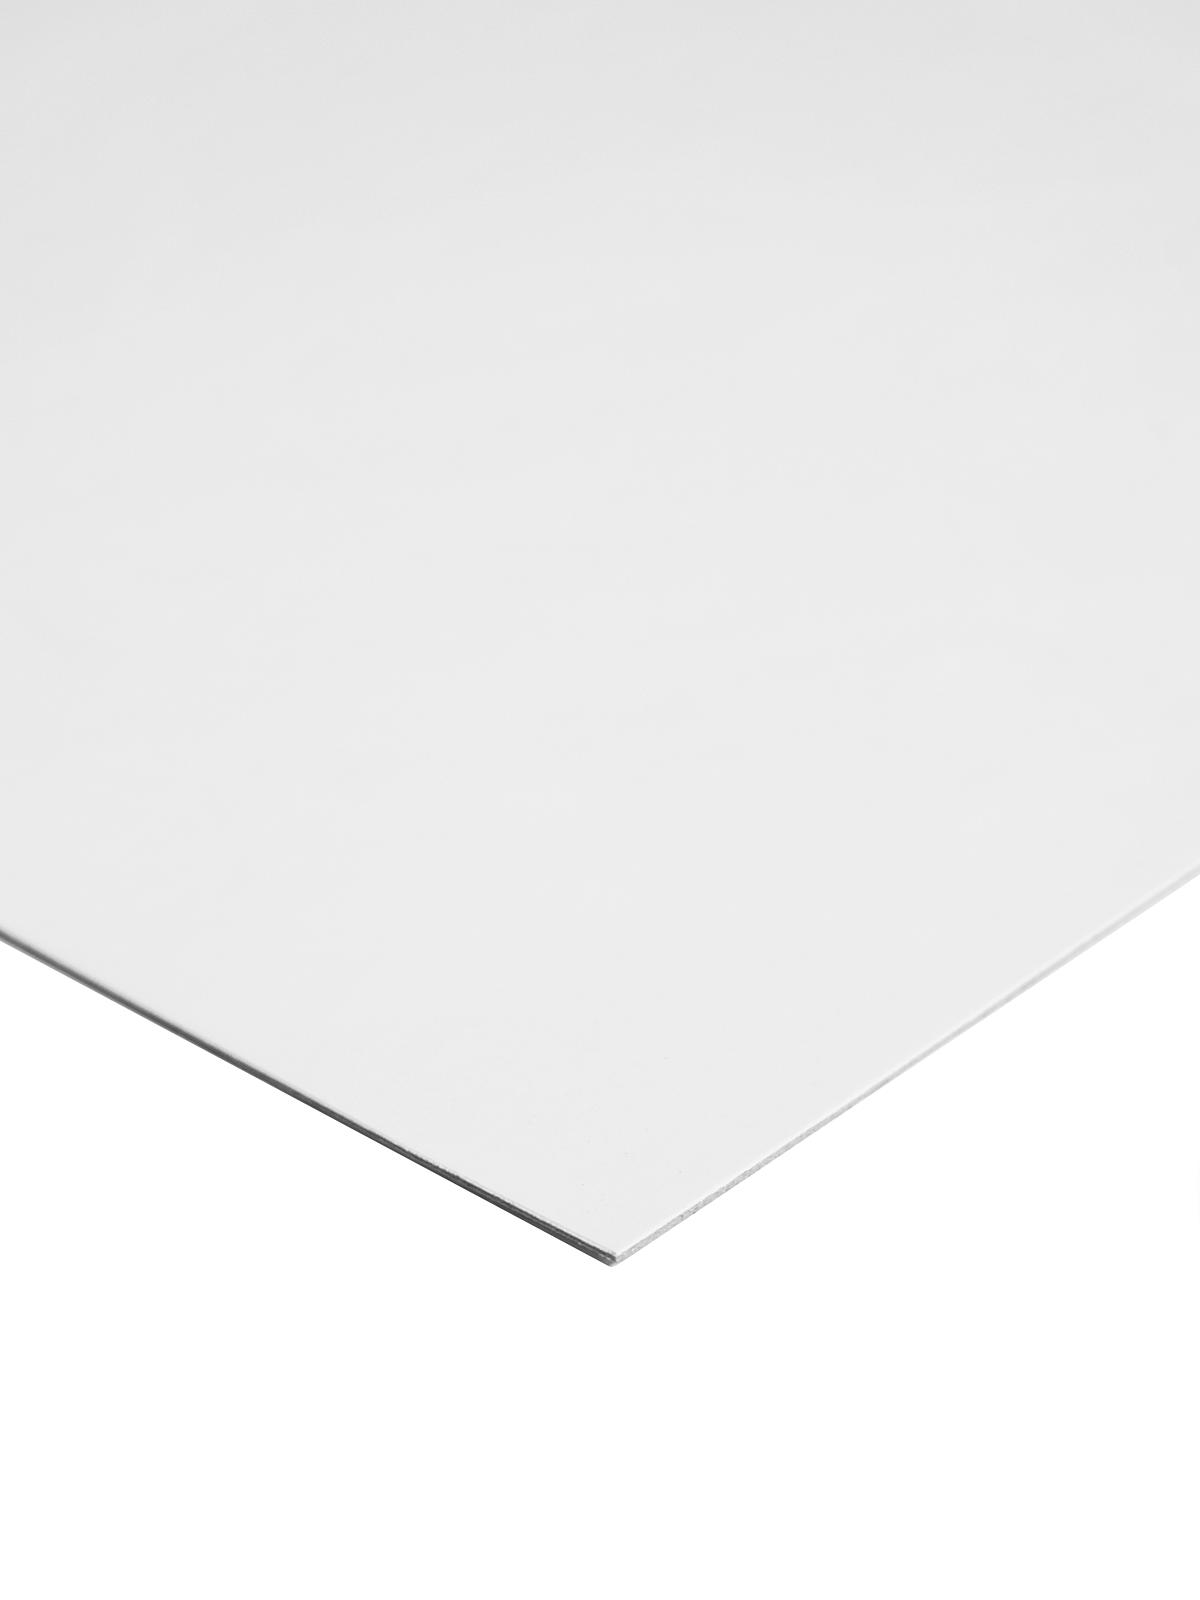 The Heavy Poster Board White